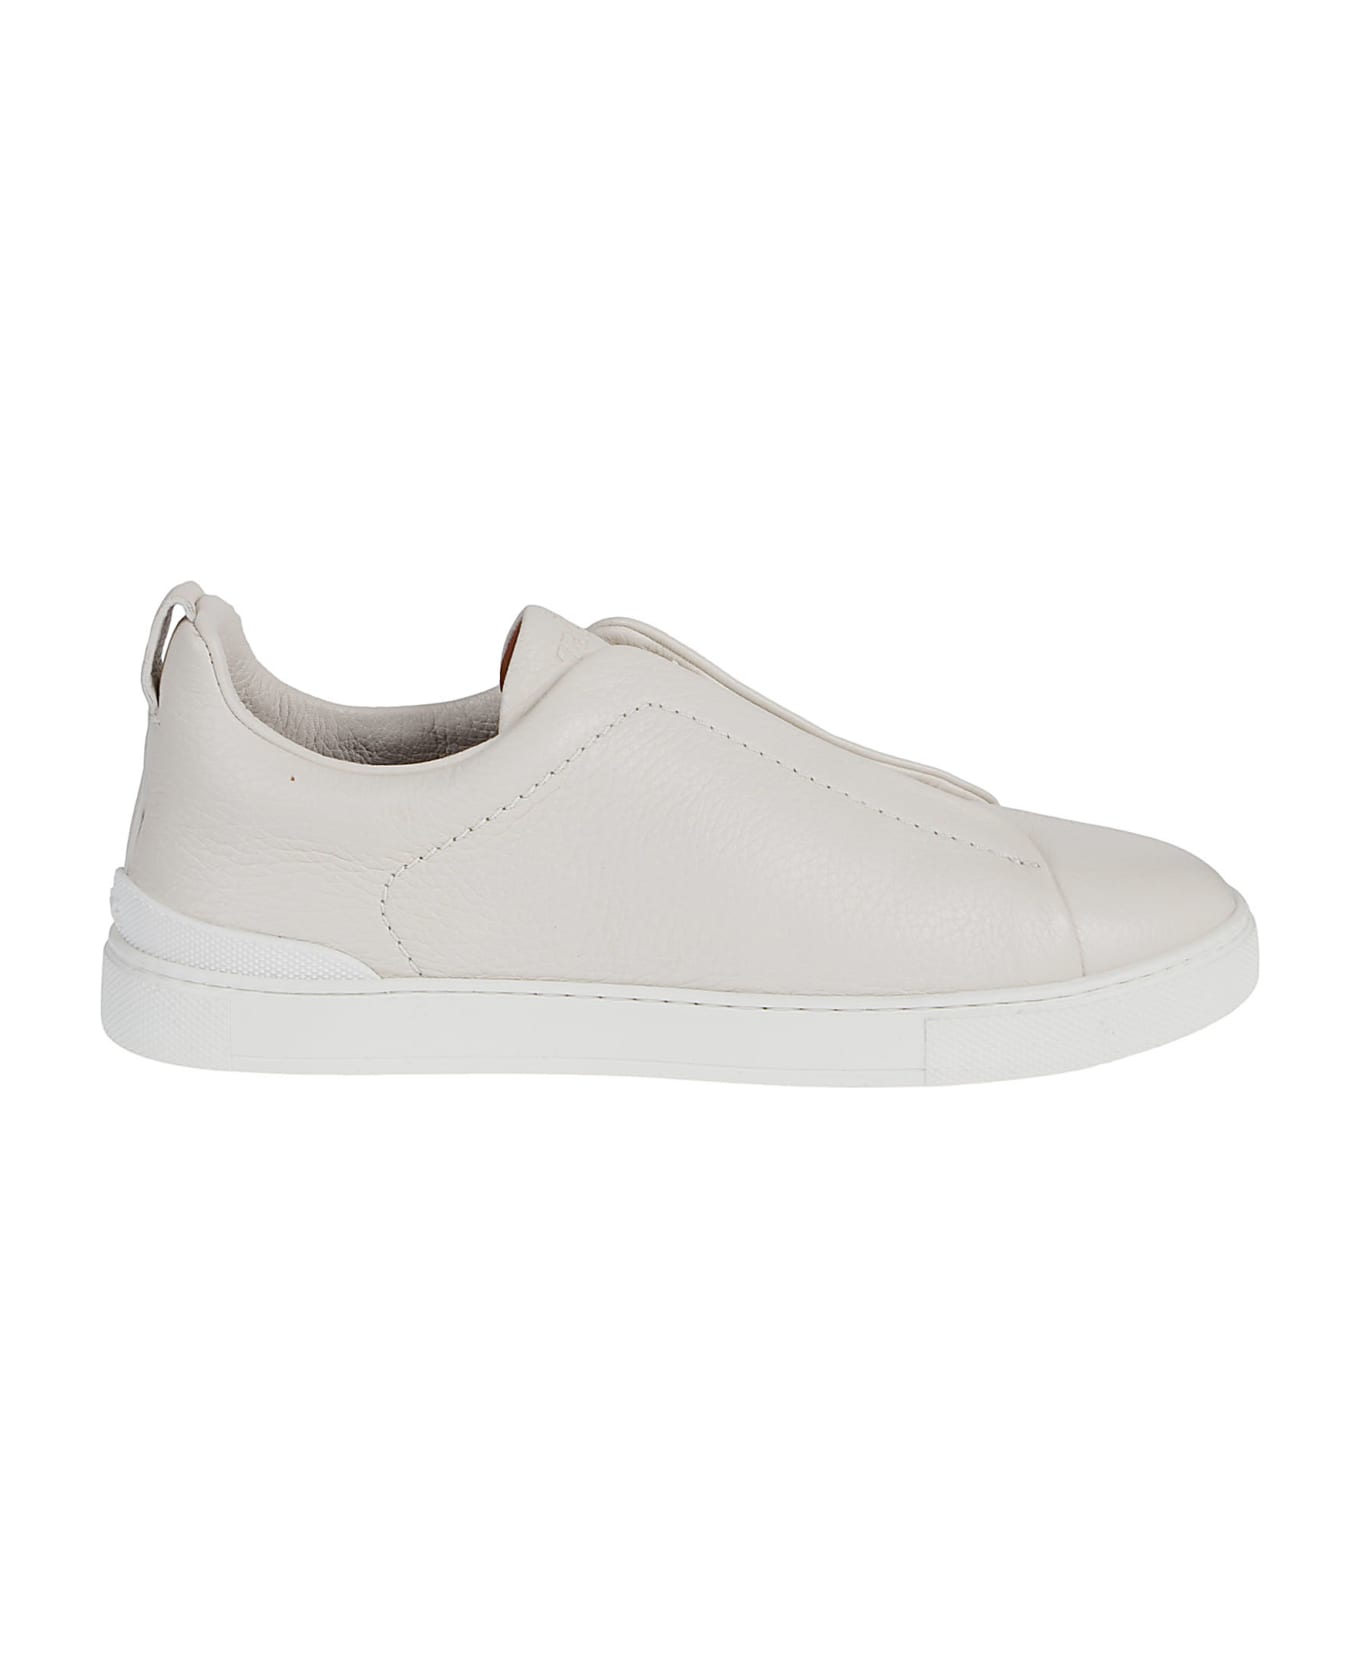 Zegna Triple Stitch Low Top Sneakers - Pan Crema スニーカー